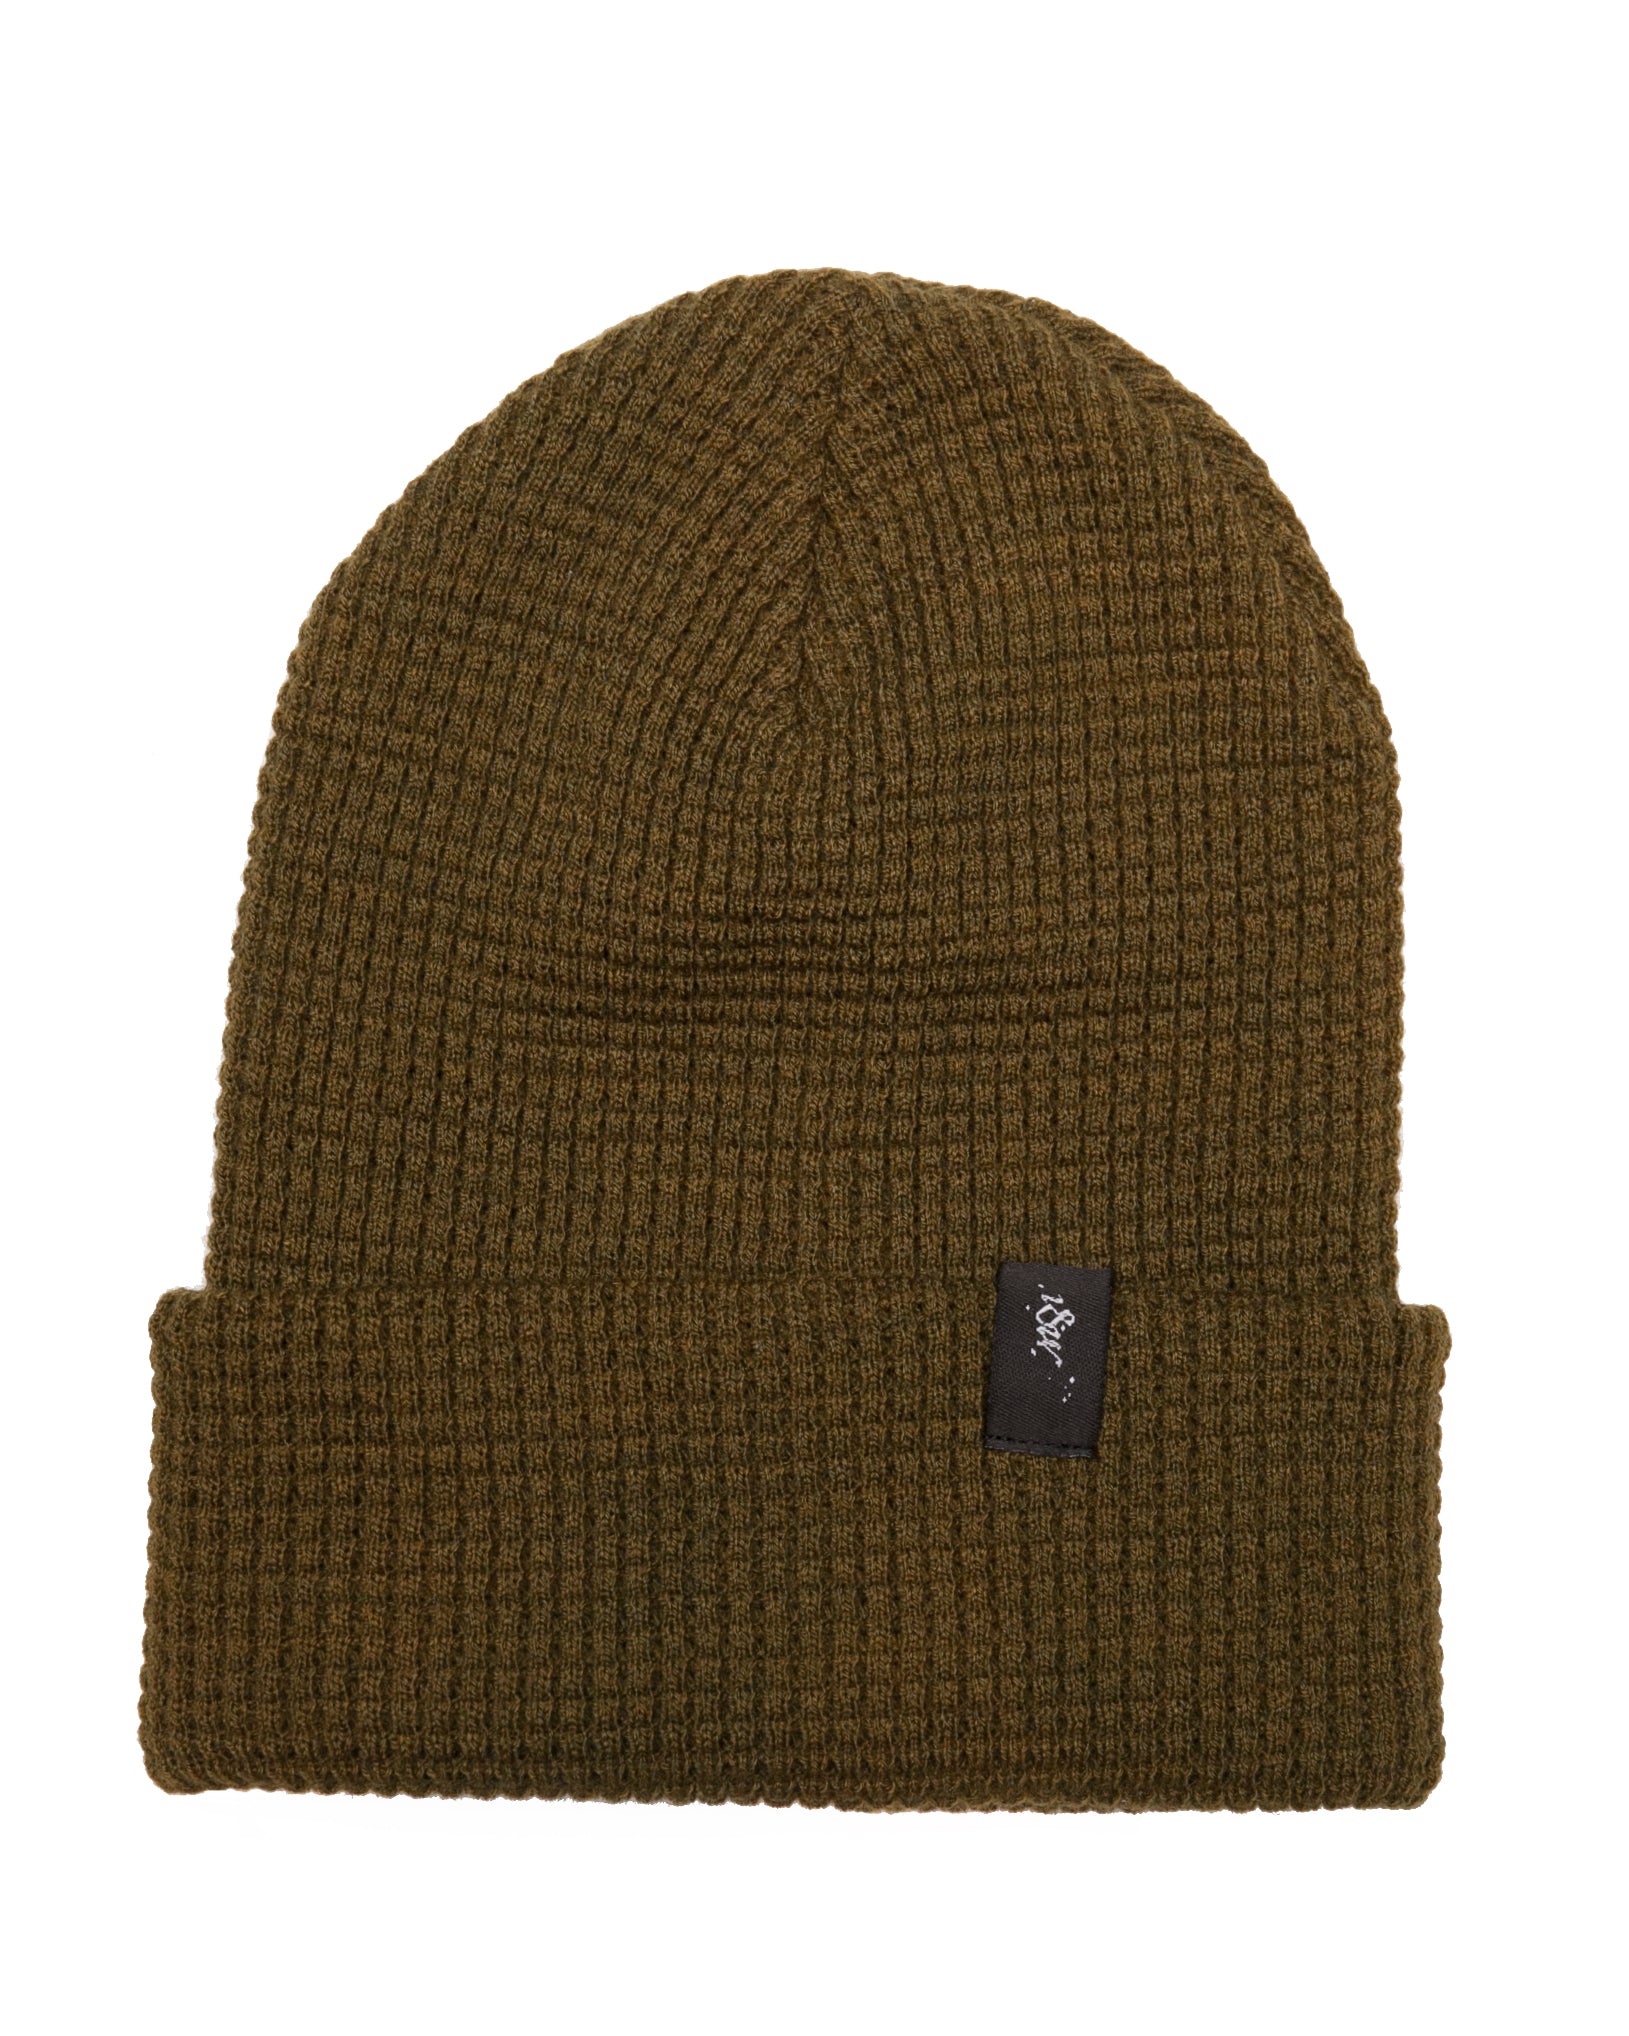 The Toque | Olive Waffle Knit